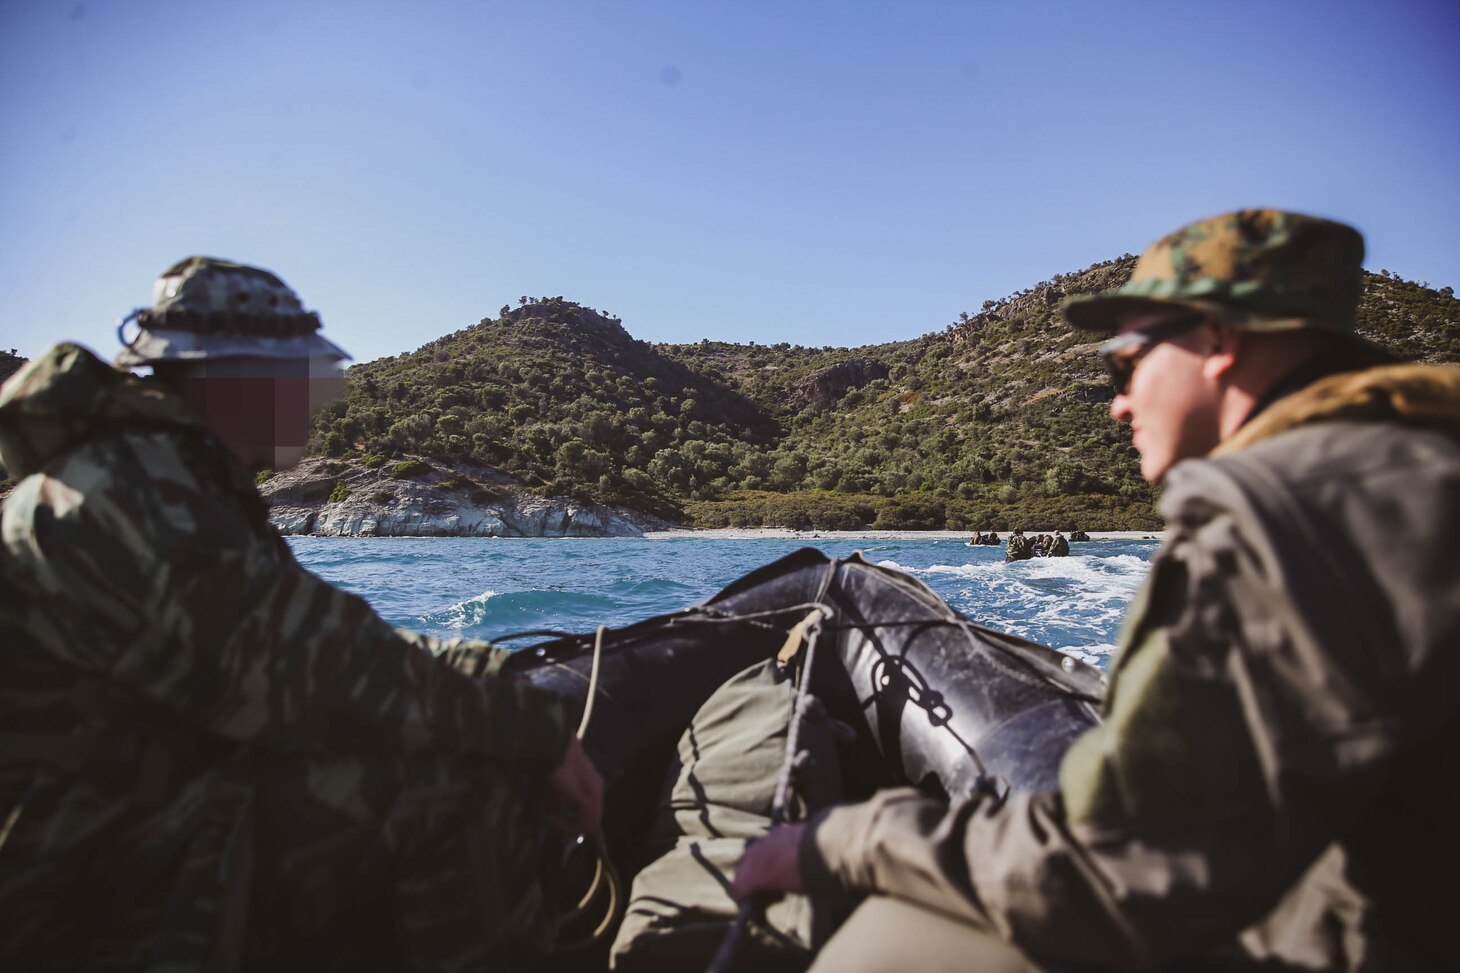 U.S. Marine Corps Cpl. Michael Earl, right, from Woodbridge, Virginia assigned to Task Force 61/2, participates in an amphibious training evolution with the Hellenic Special Forces during exercise Alexander the Great 22, Greece, May 9, 2022. Alexander the Great 22 strengthens interoperability and force readiness between the U.S., Greece, and Allied nations, enhancing strategic defense and partnership while promoting security and stability in the region. (U.S. Marine Corps photo by Lance Cpl. Emma Gray)